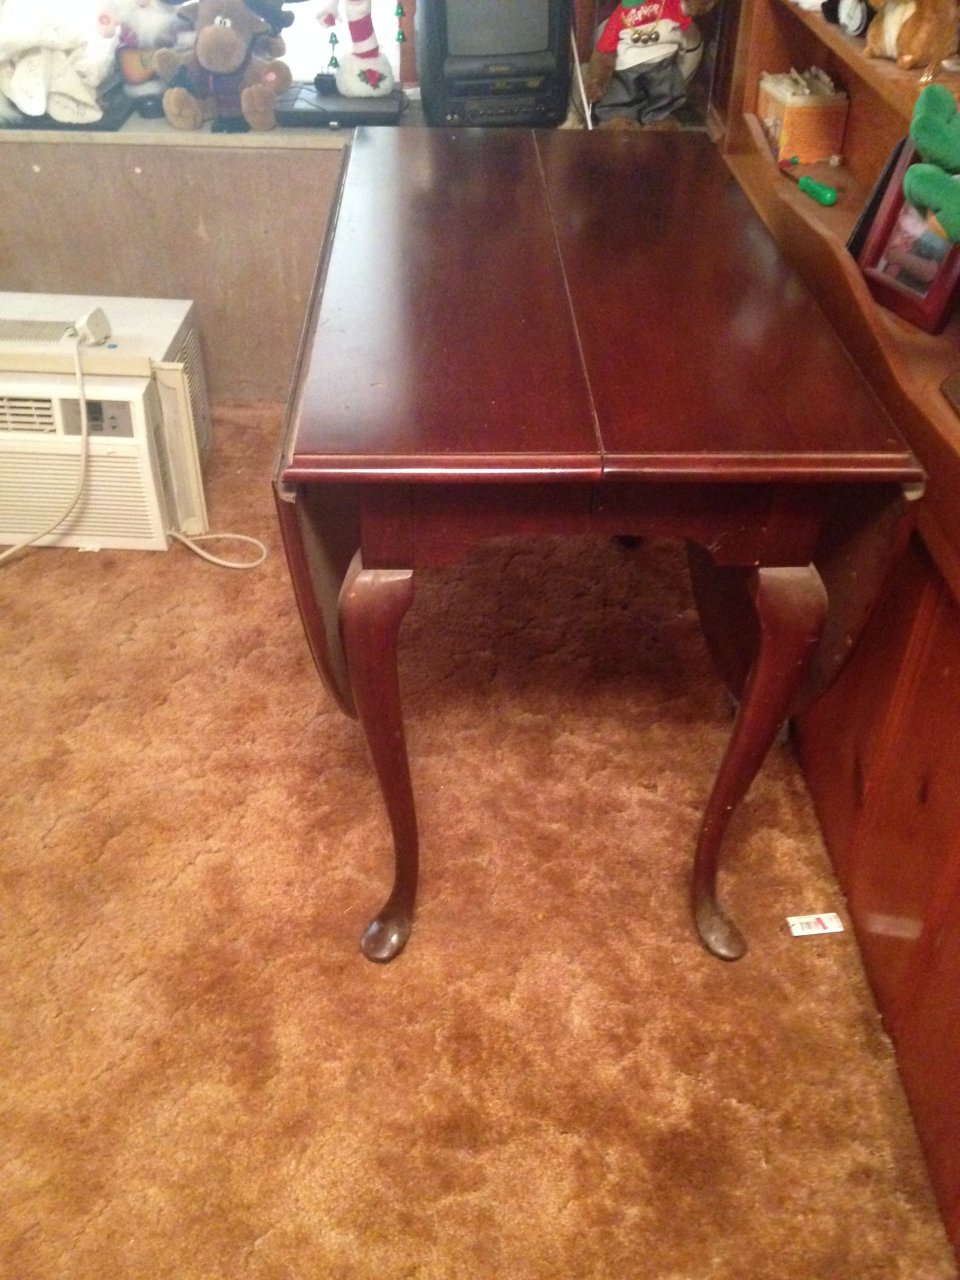 Thomasville Drop-leaf Table | My Antique Furniture Collection